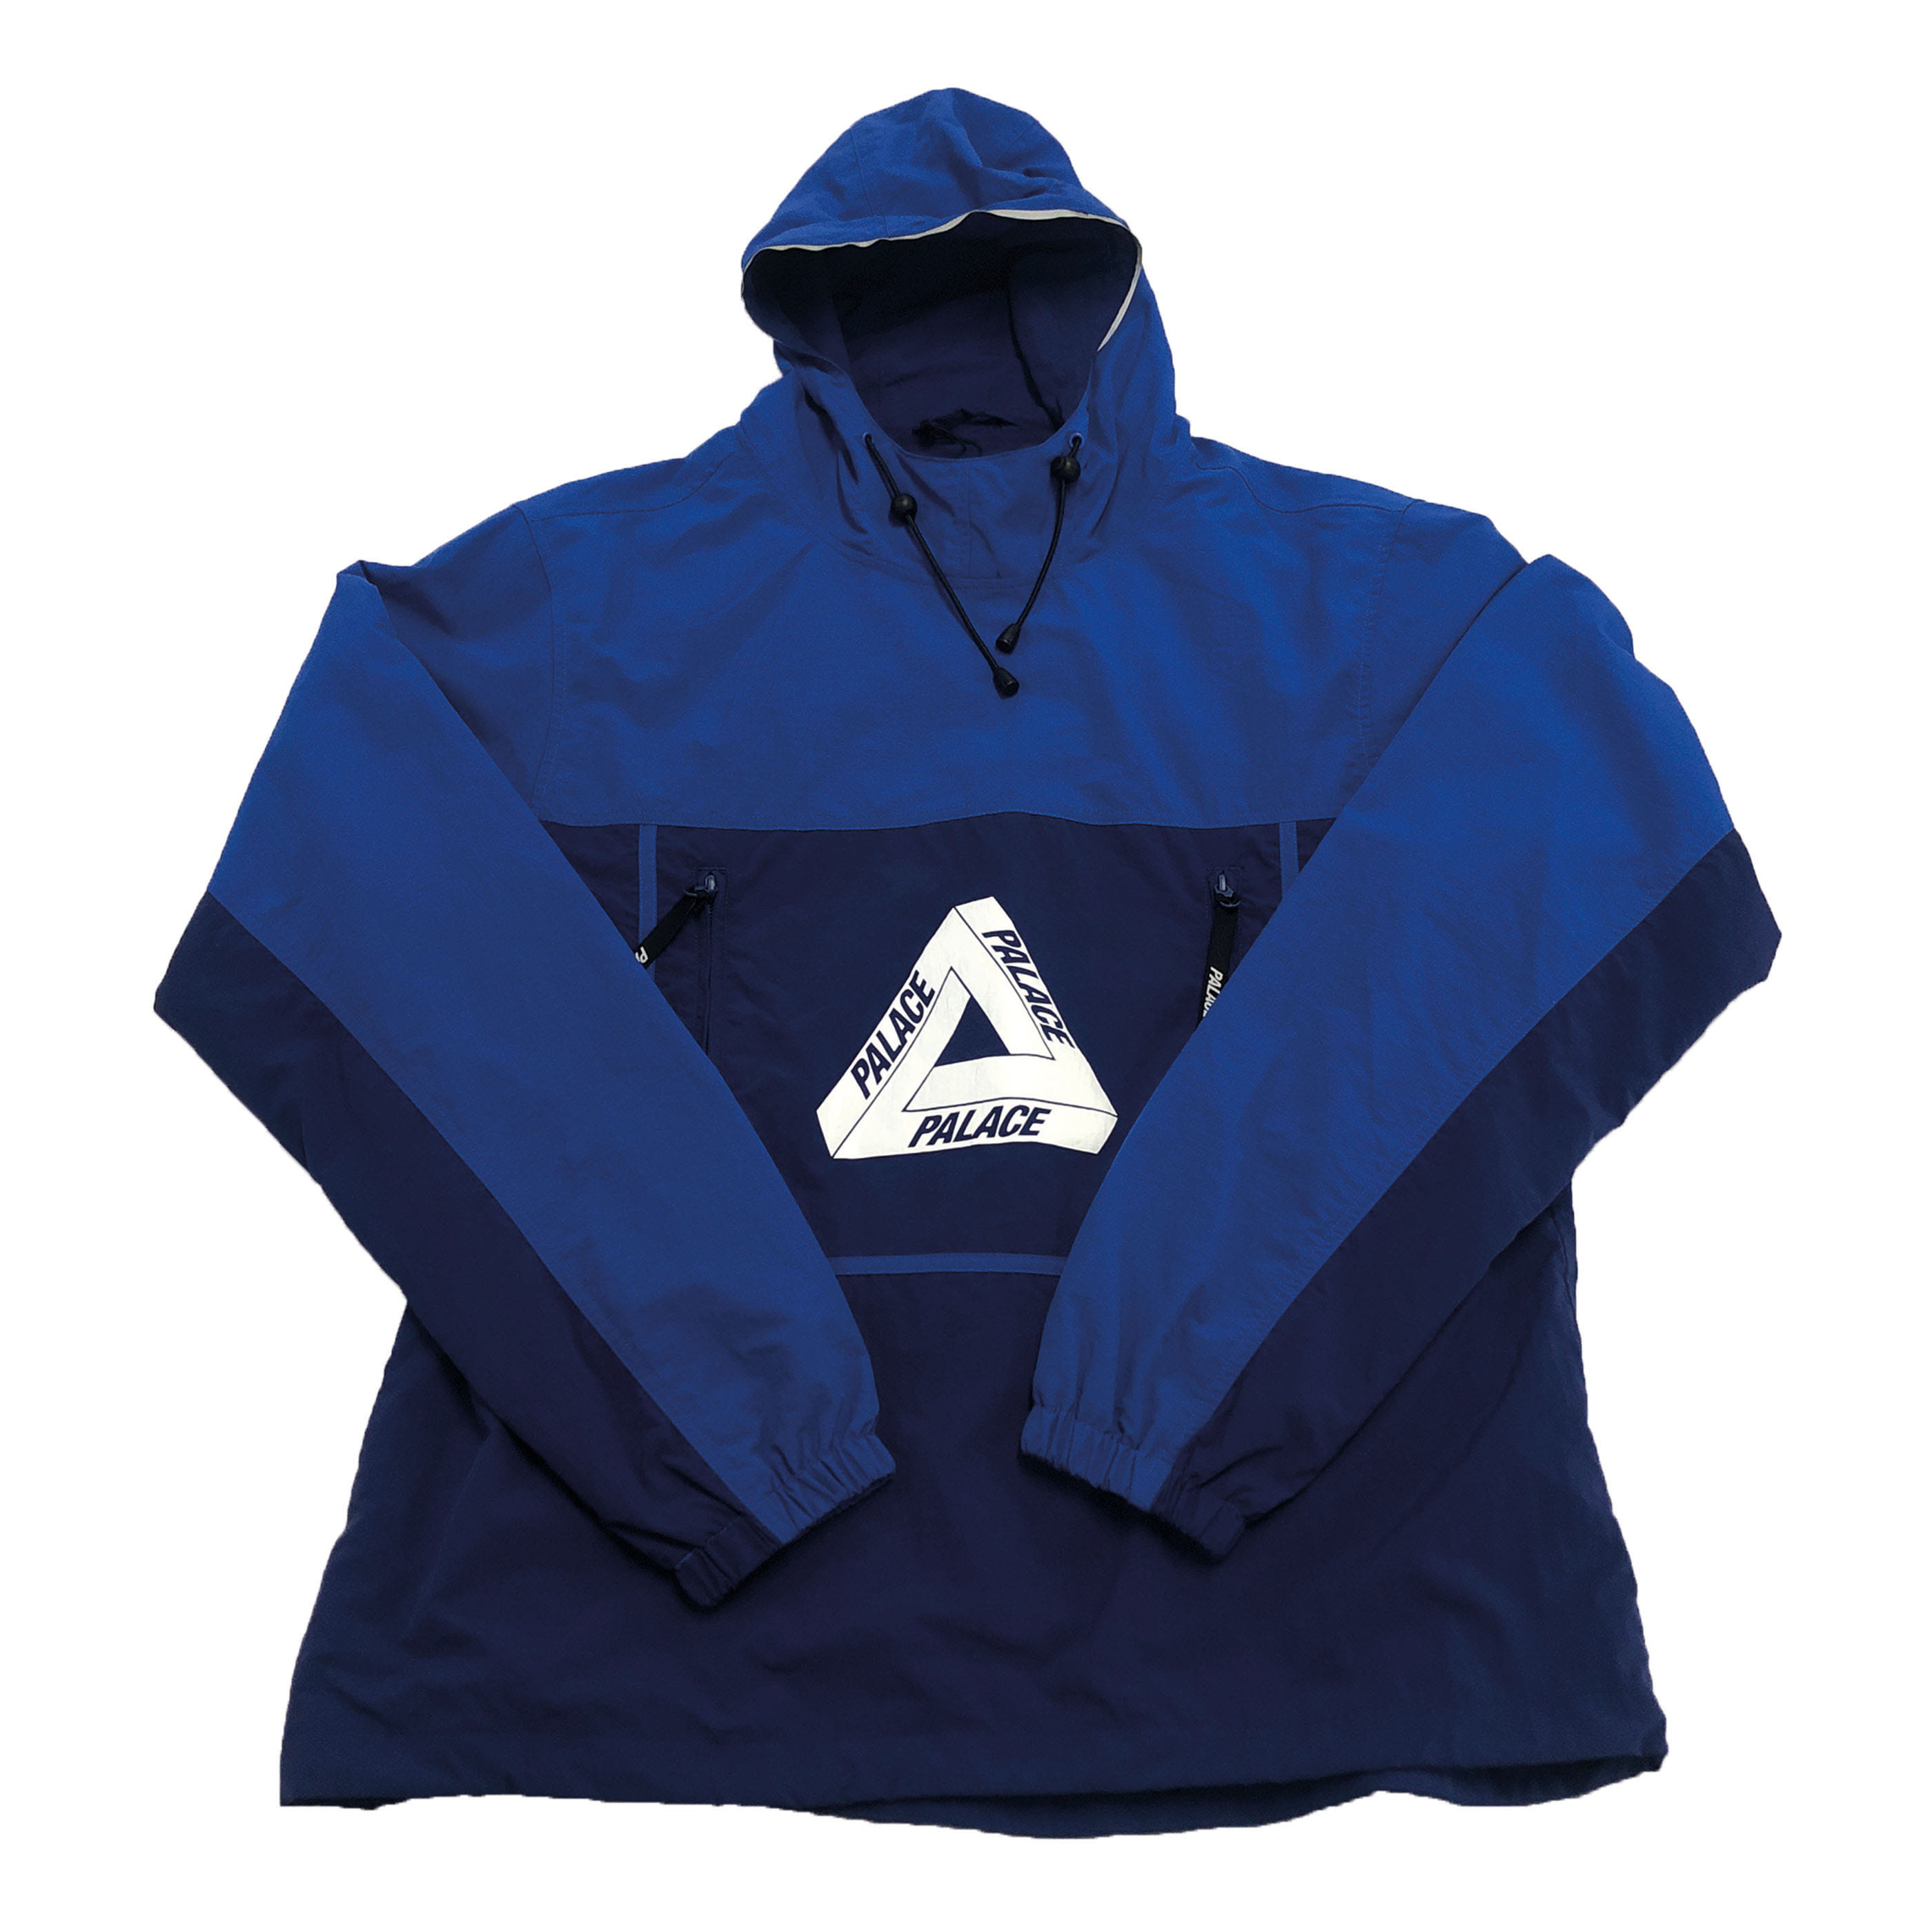 [Palace] Over Park Sell Top Blue Jacket - Size L